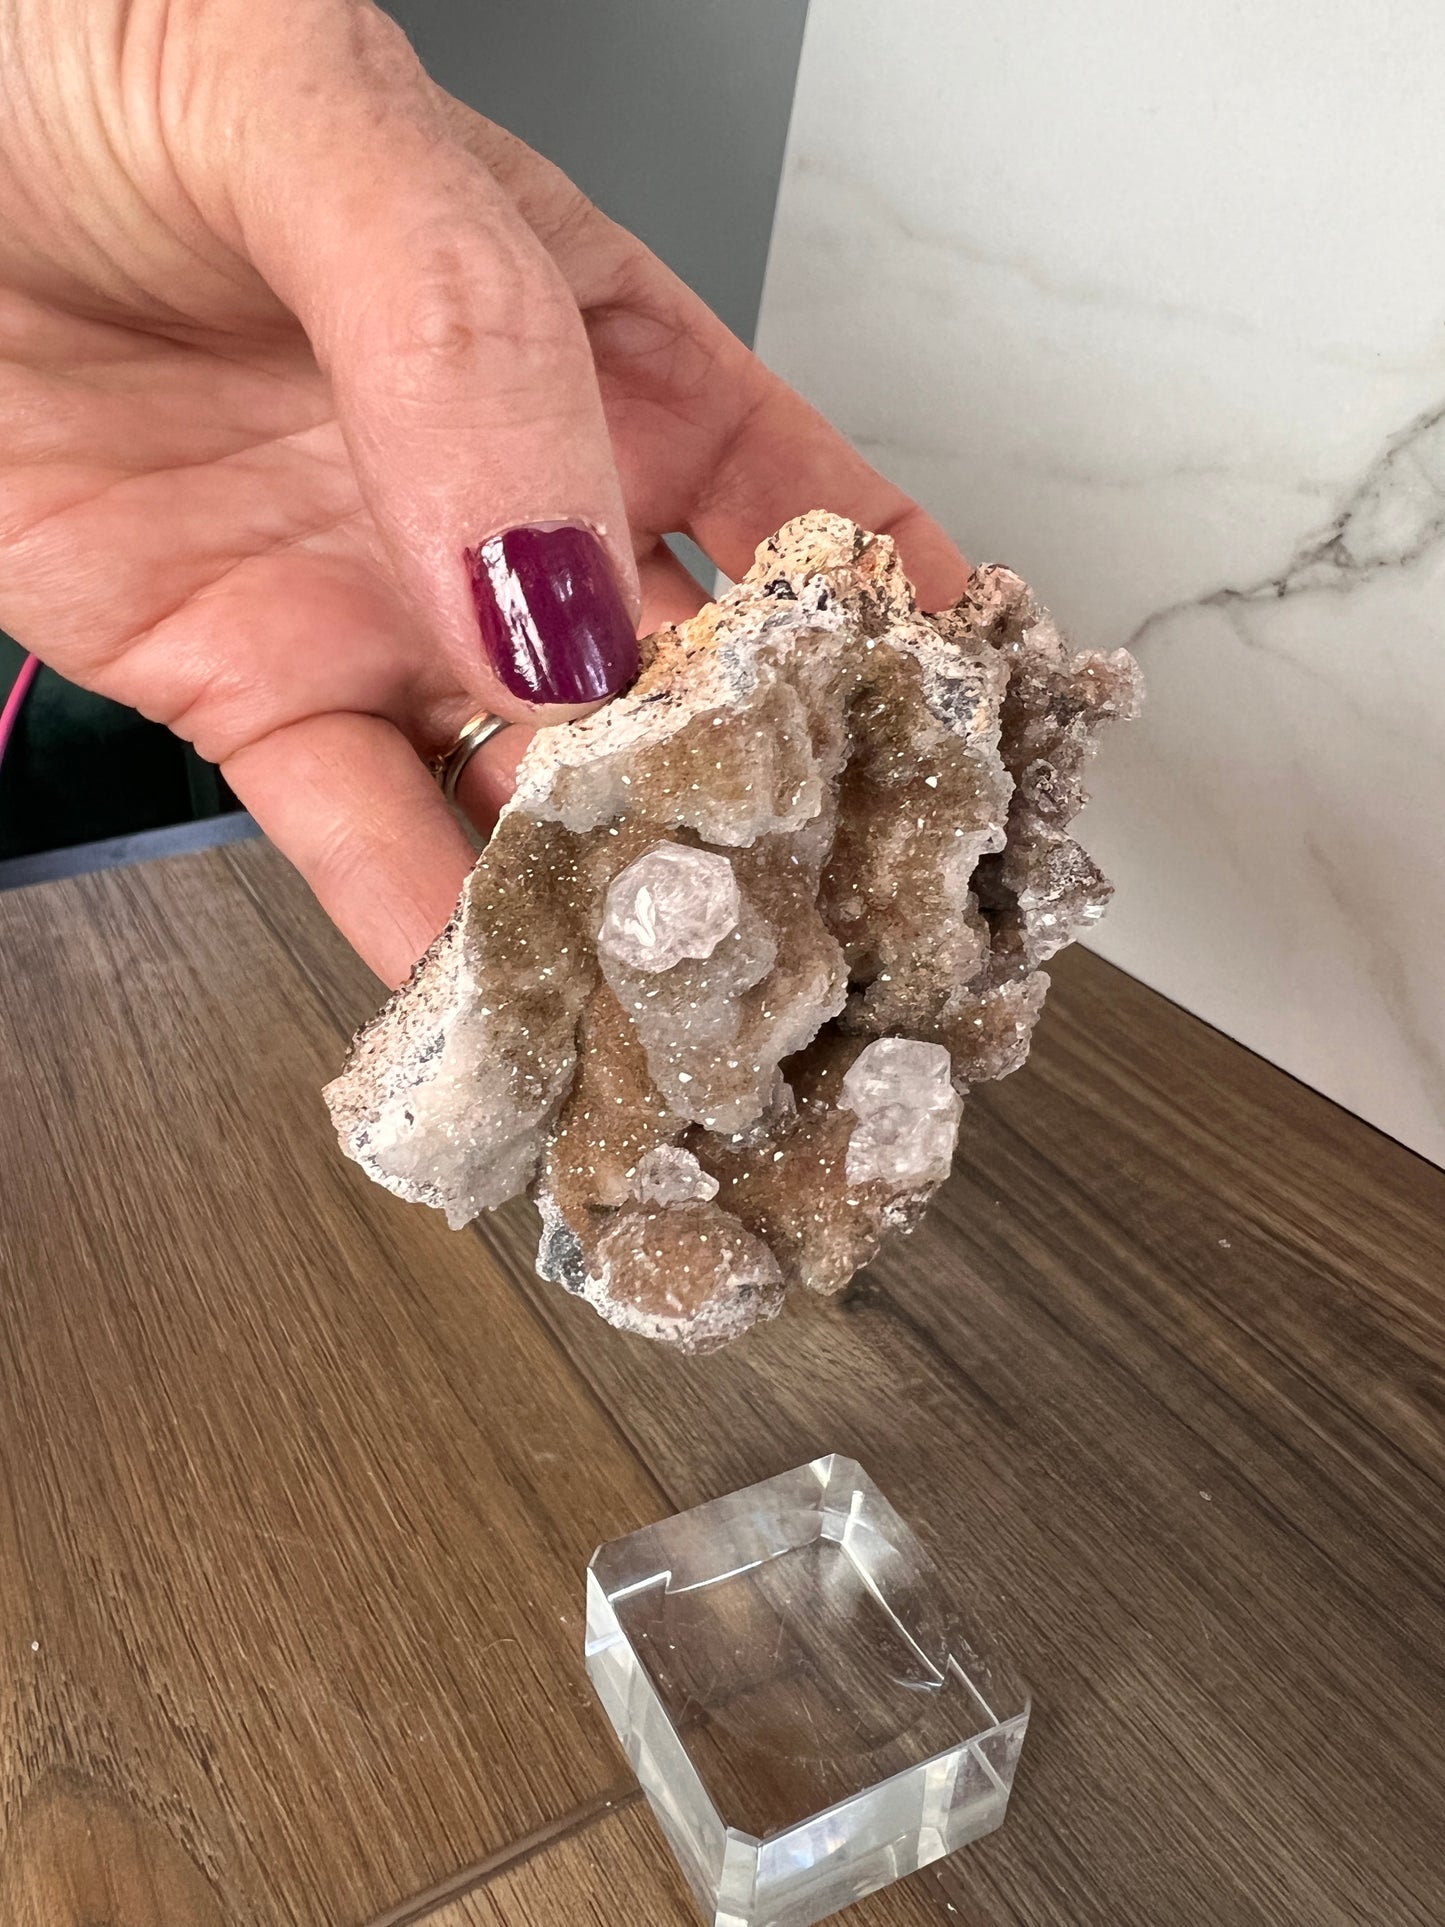 Mexican Calcite Natural Crystal Cluster Specimen